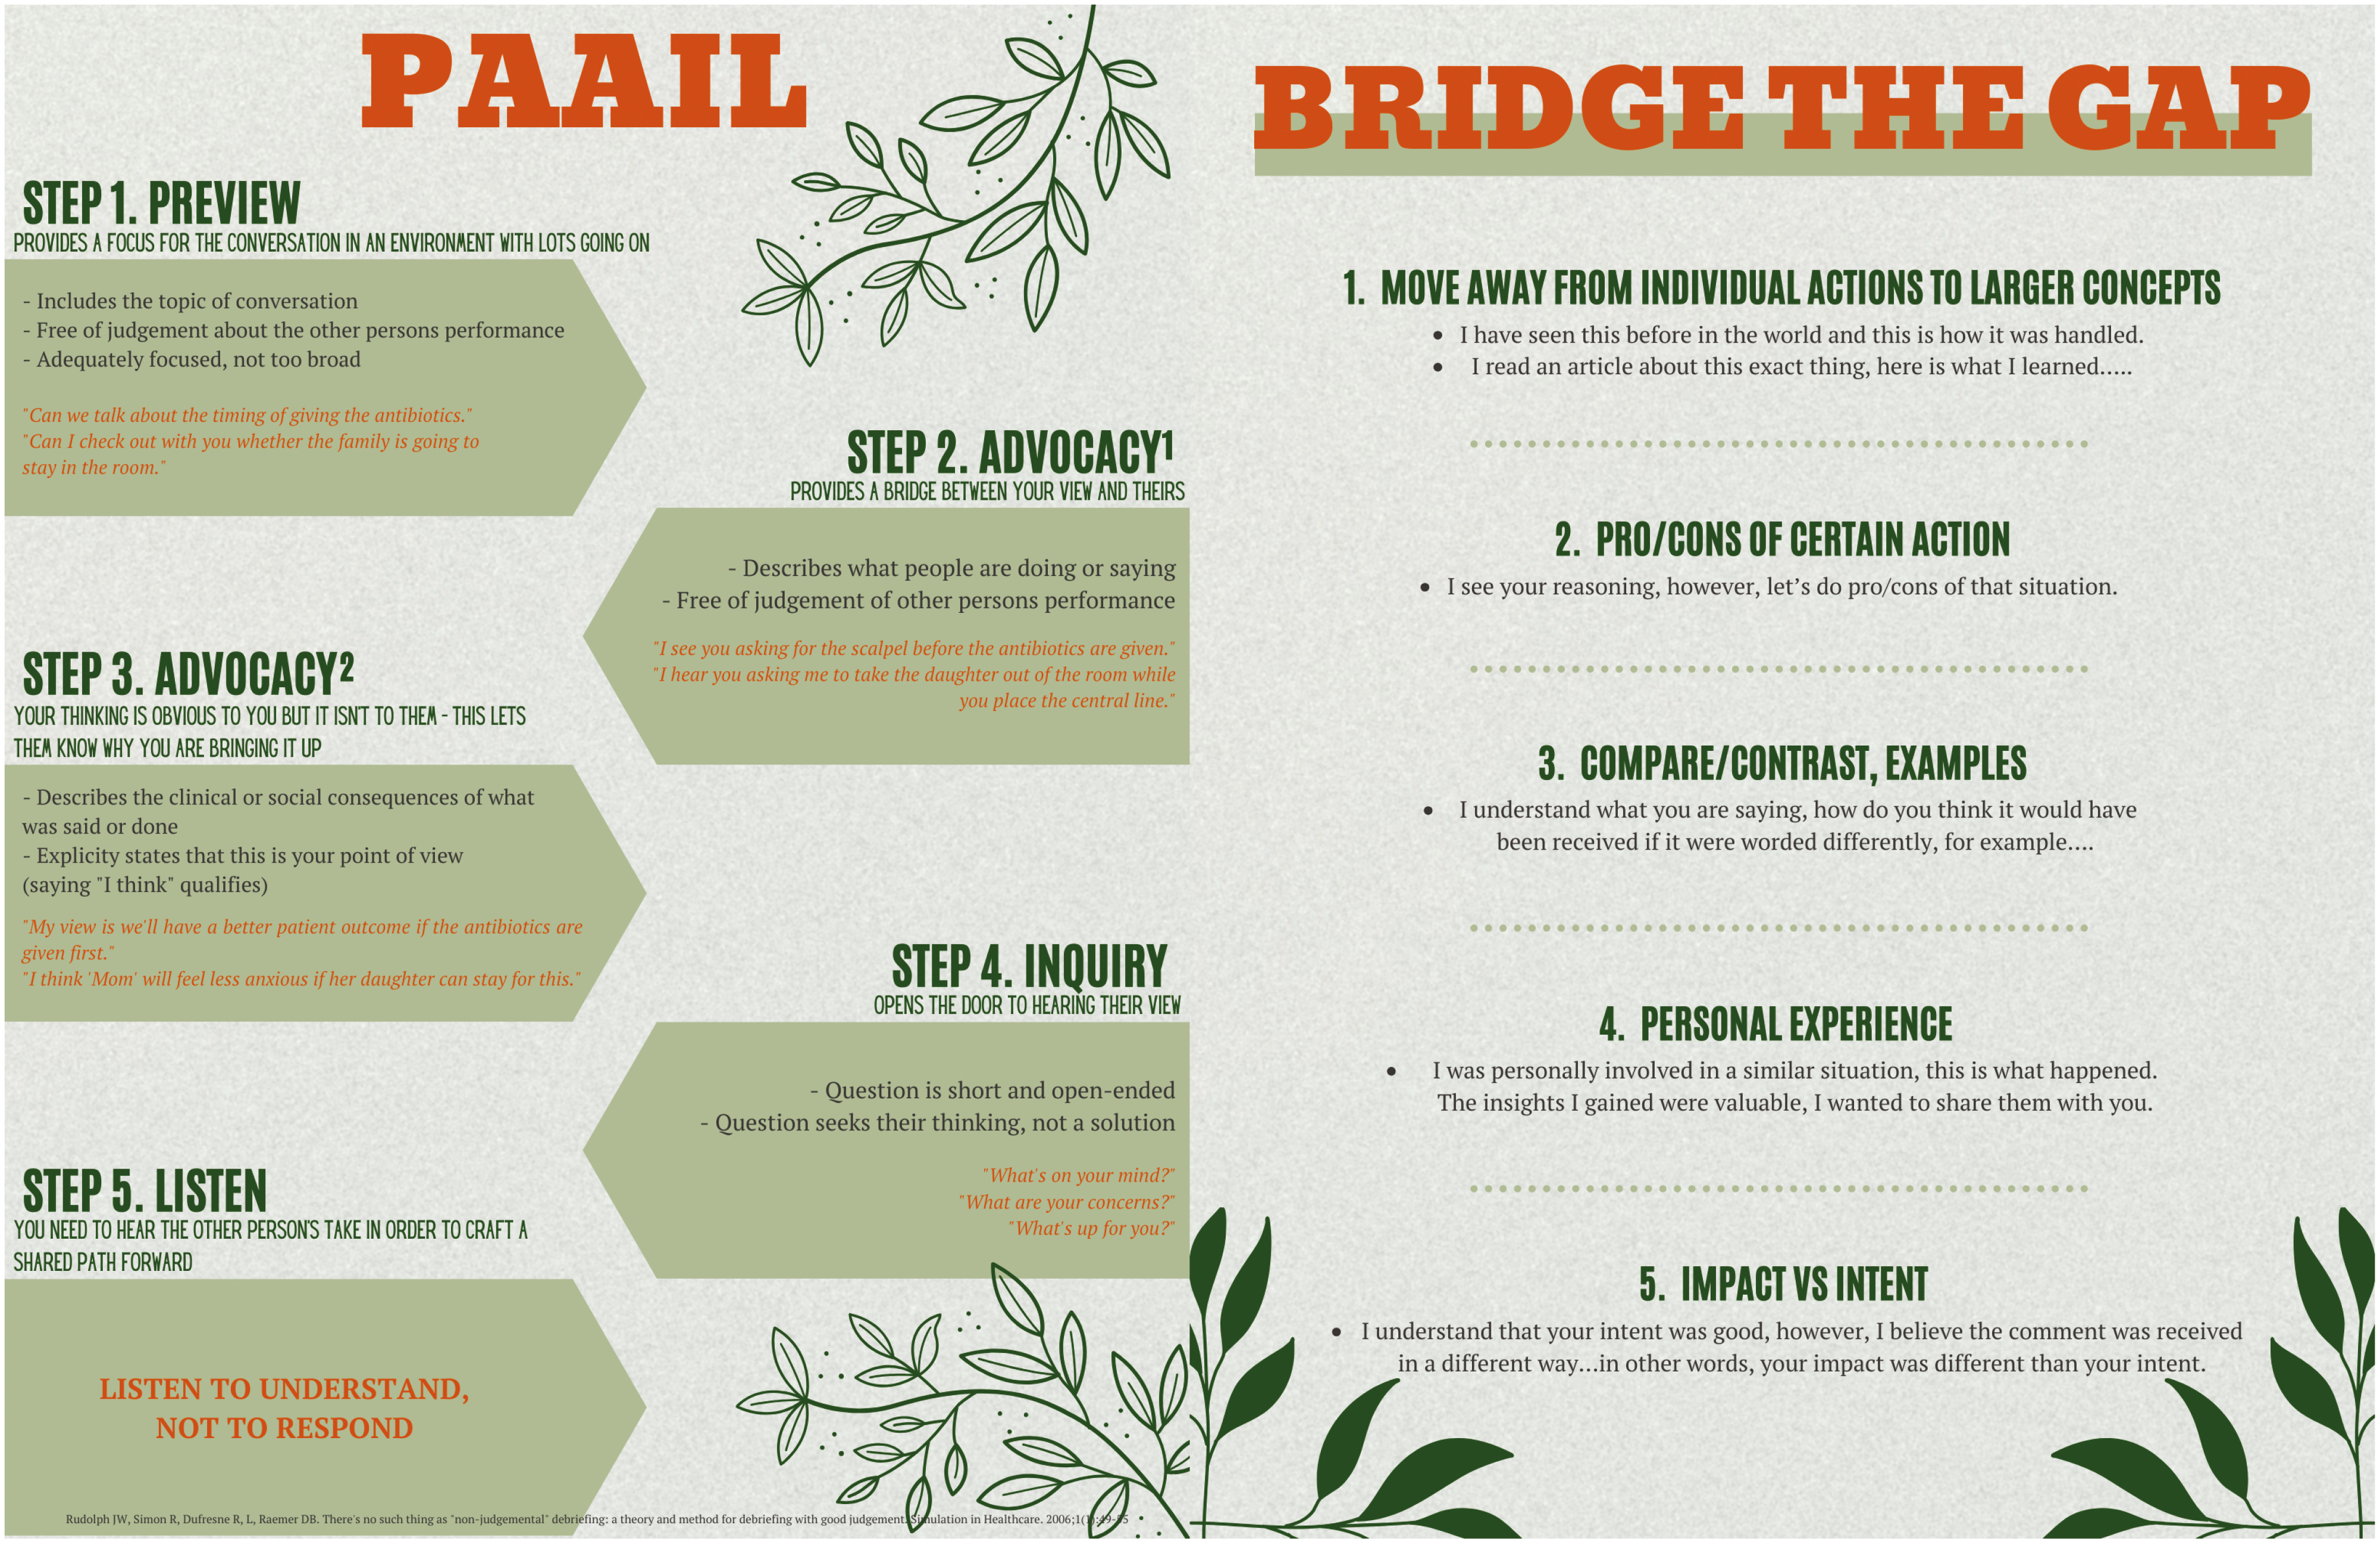 PAAIL and Bridge-the-Gap framework for bystander intervention.